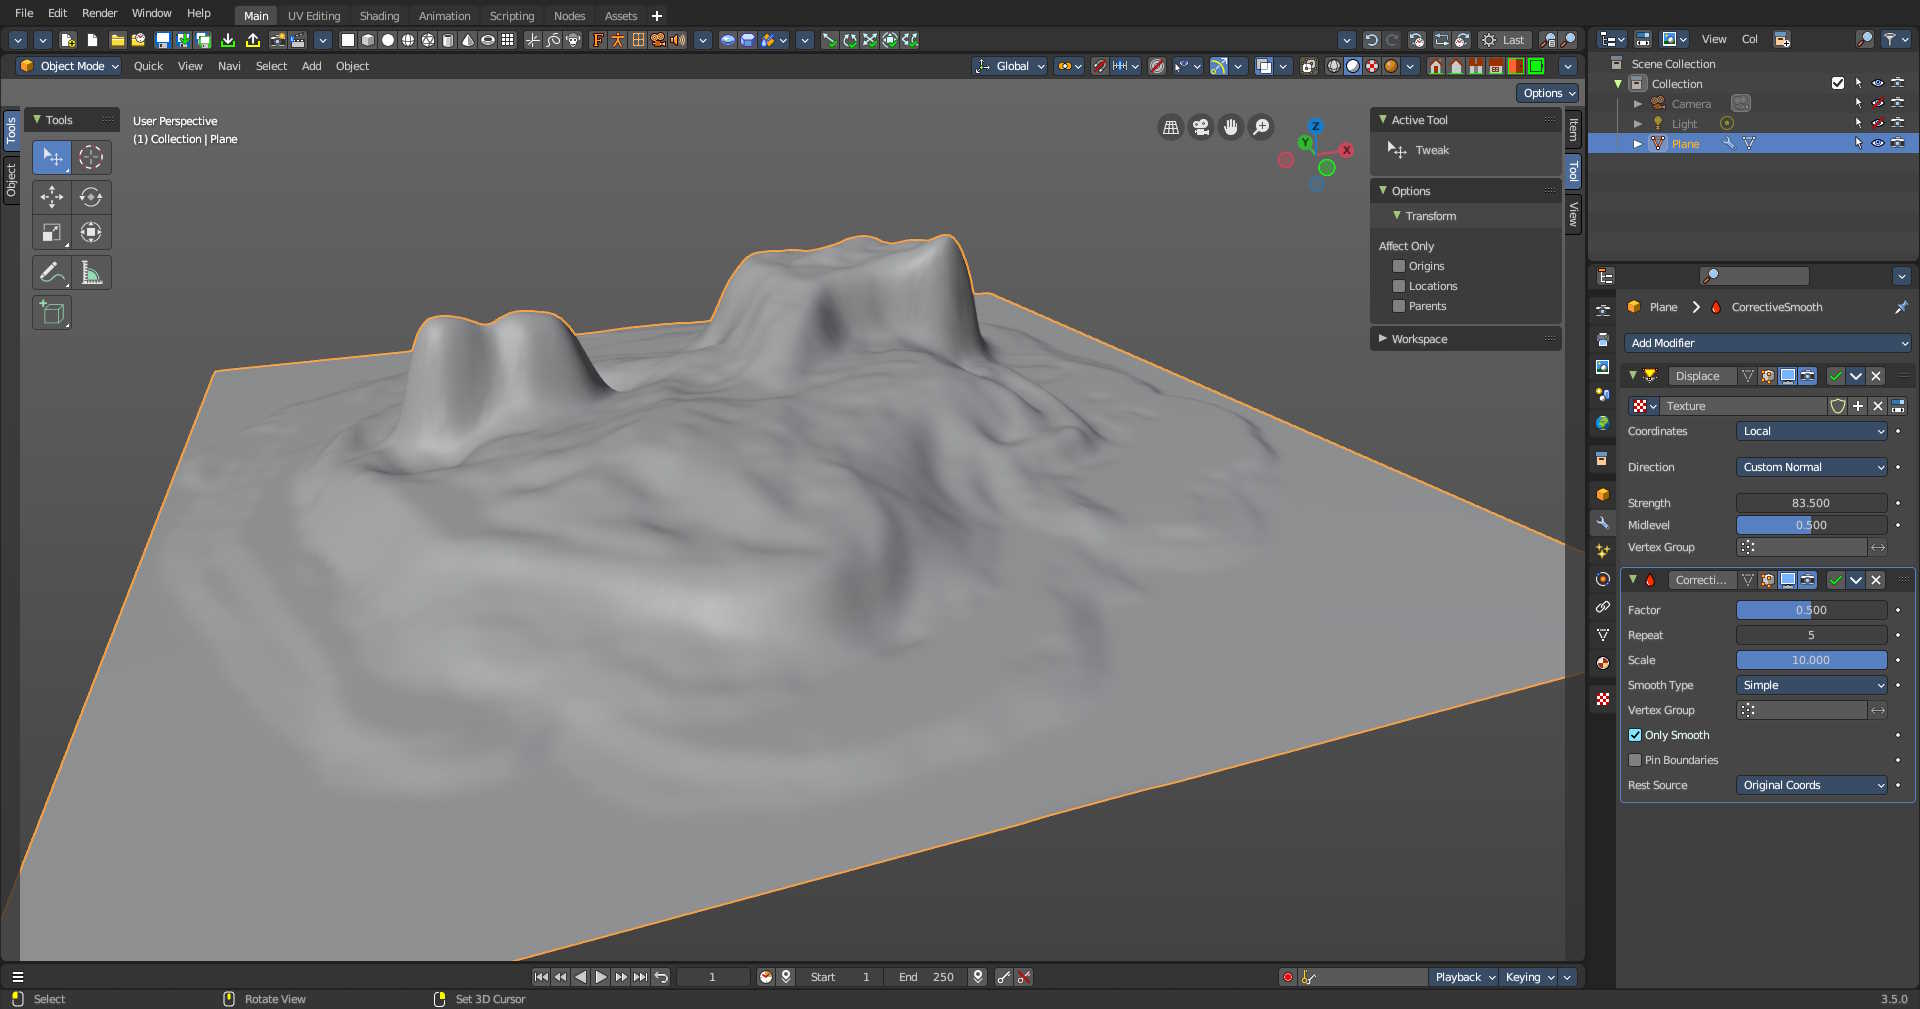 Blender screenshot showing the basic heightmap creating an island. It has a Displace modifier and a Correction modifier.